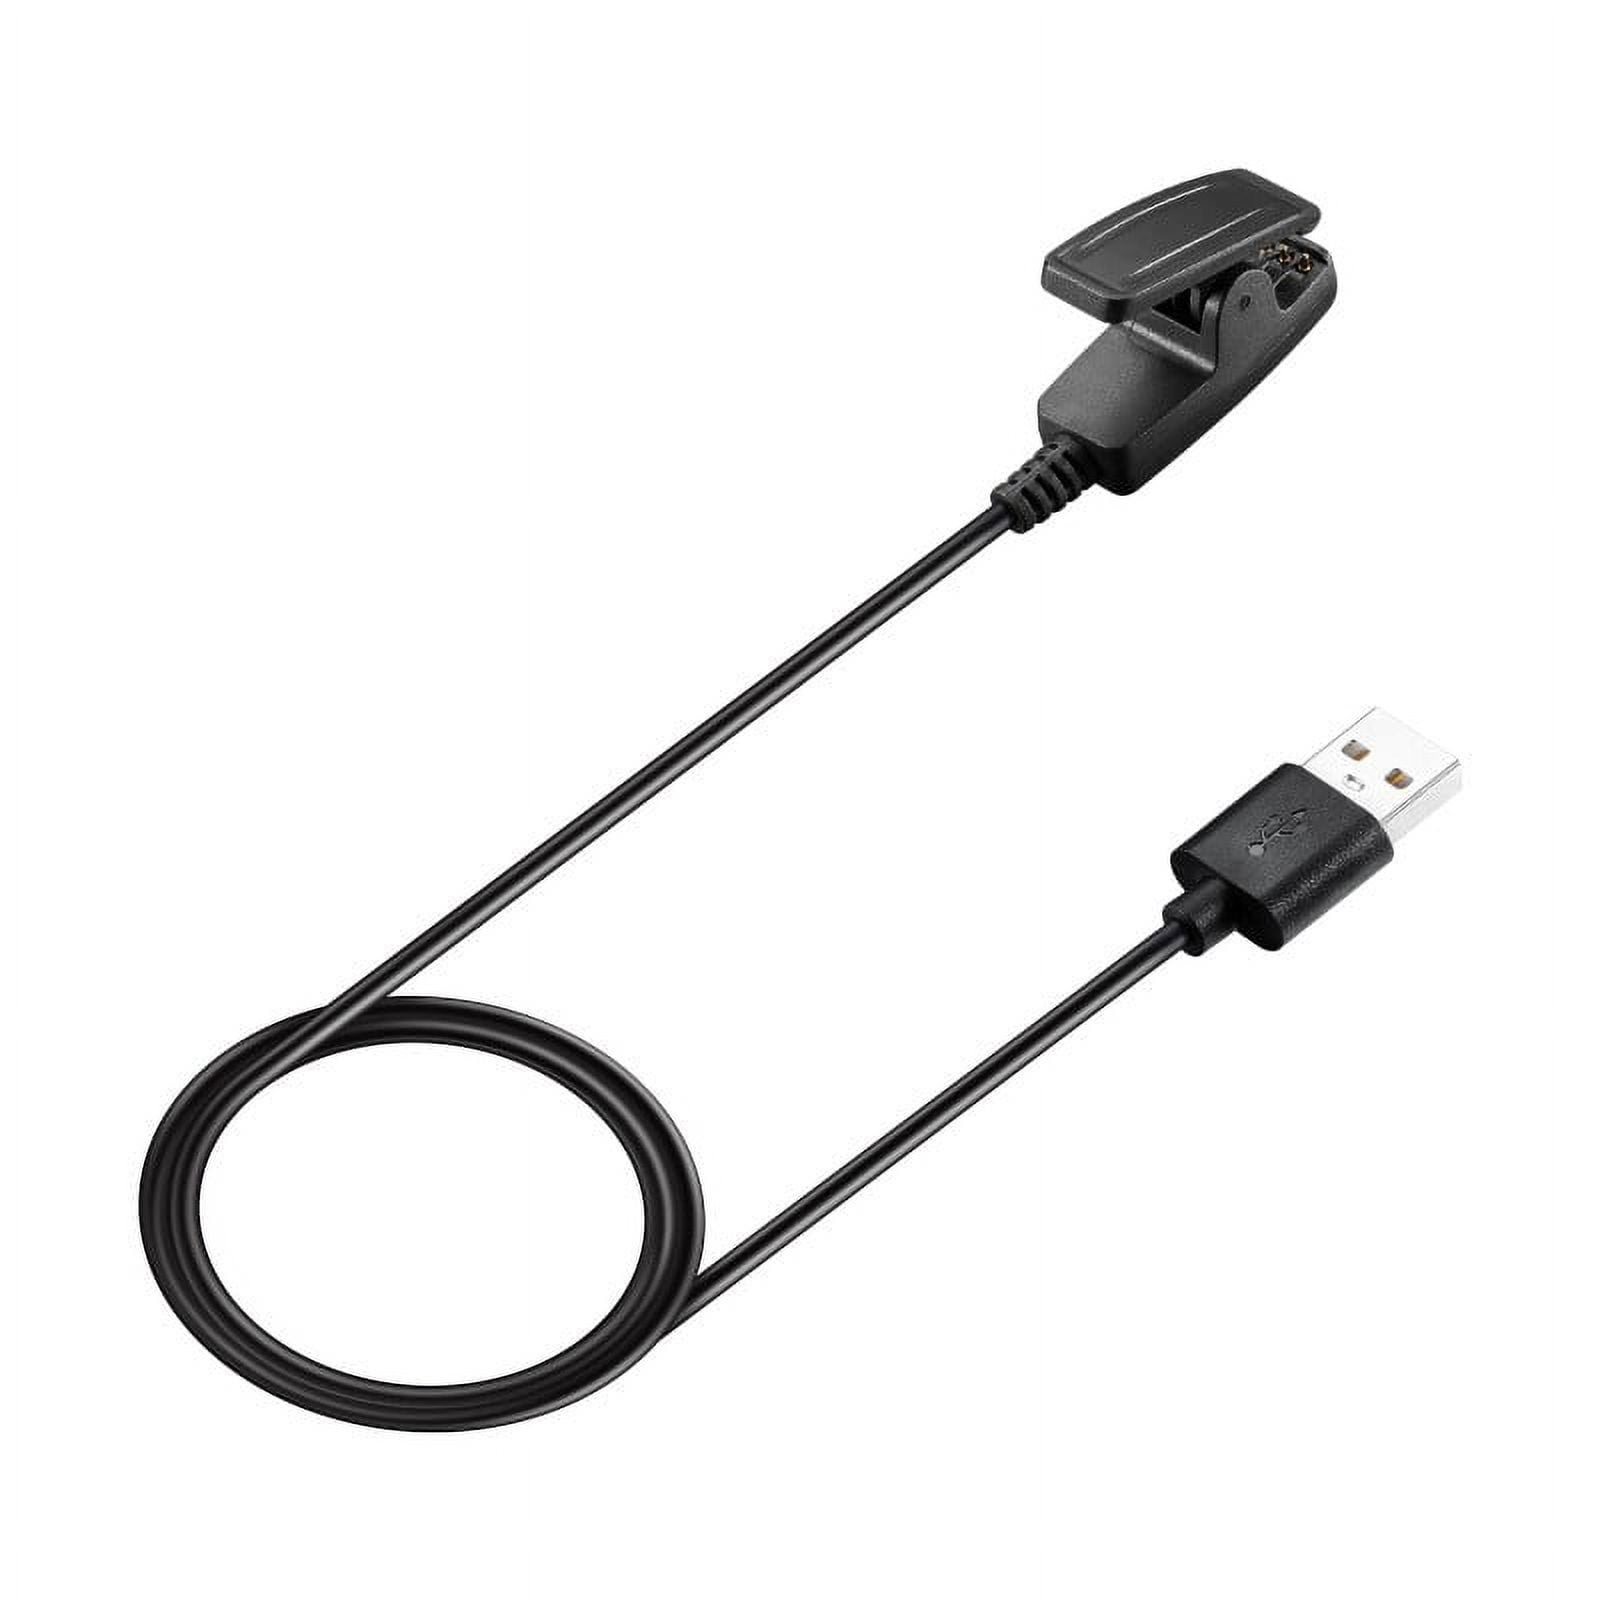 TUSITA Charger Compatible with Garmin Forerunner 35 35J 230 235 630 645  Music 735XT, Approach G10 S20, Vivomove HR, ForeAthlete 35J, Lily - USB